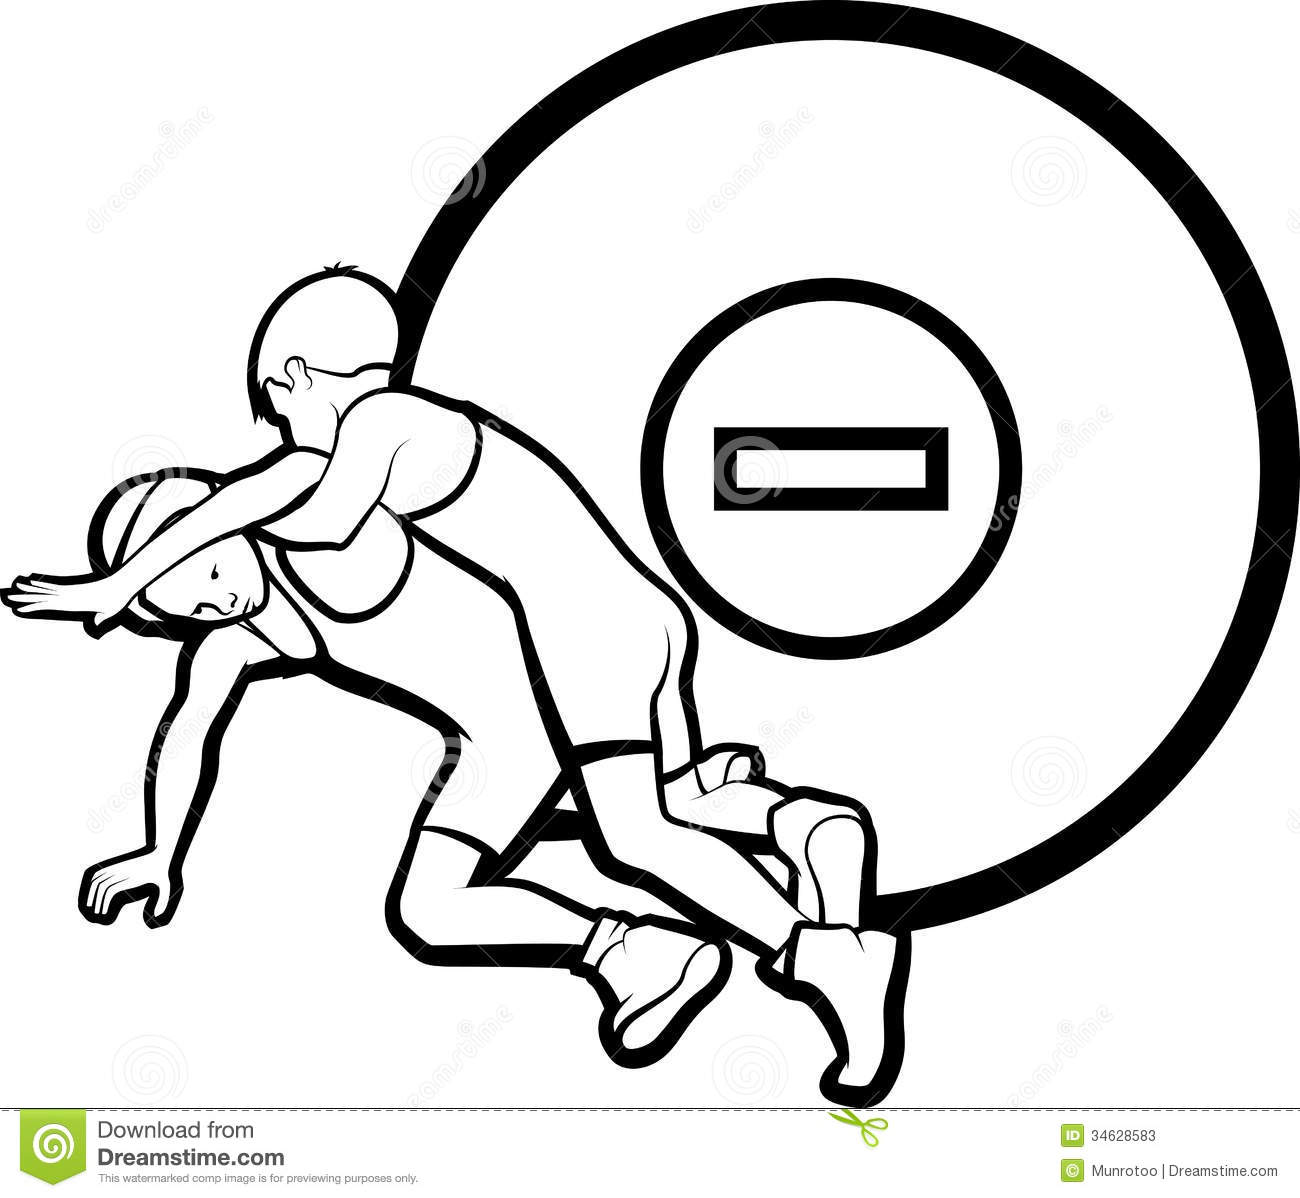 Black And White Vector Illustration Of Boy Wrestlers With A Wrestling